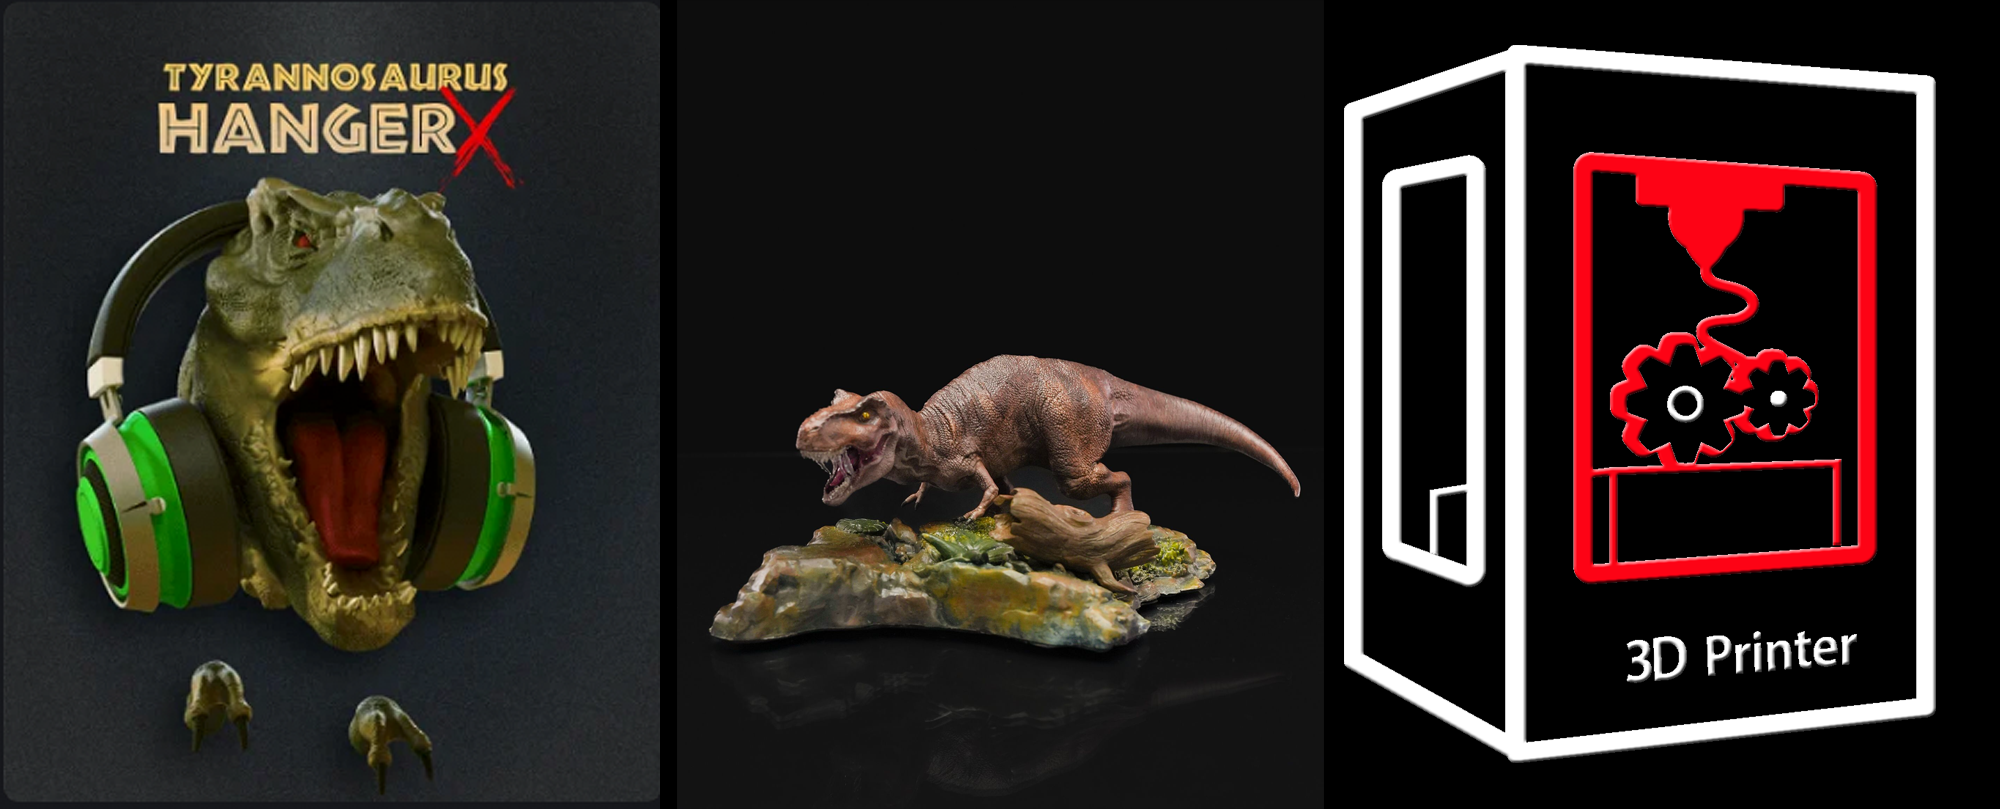 Dinosaur collection 3d printed model files for download